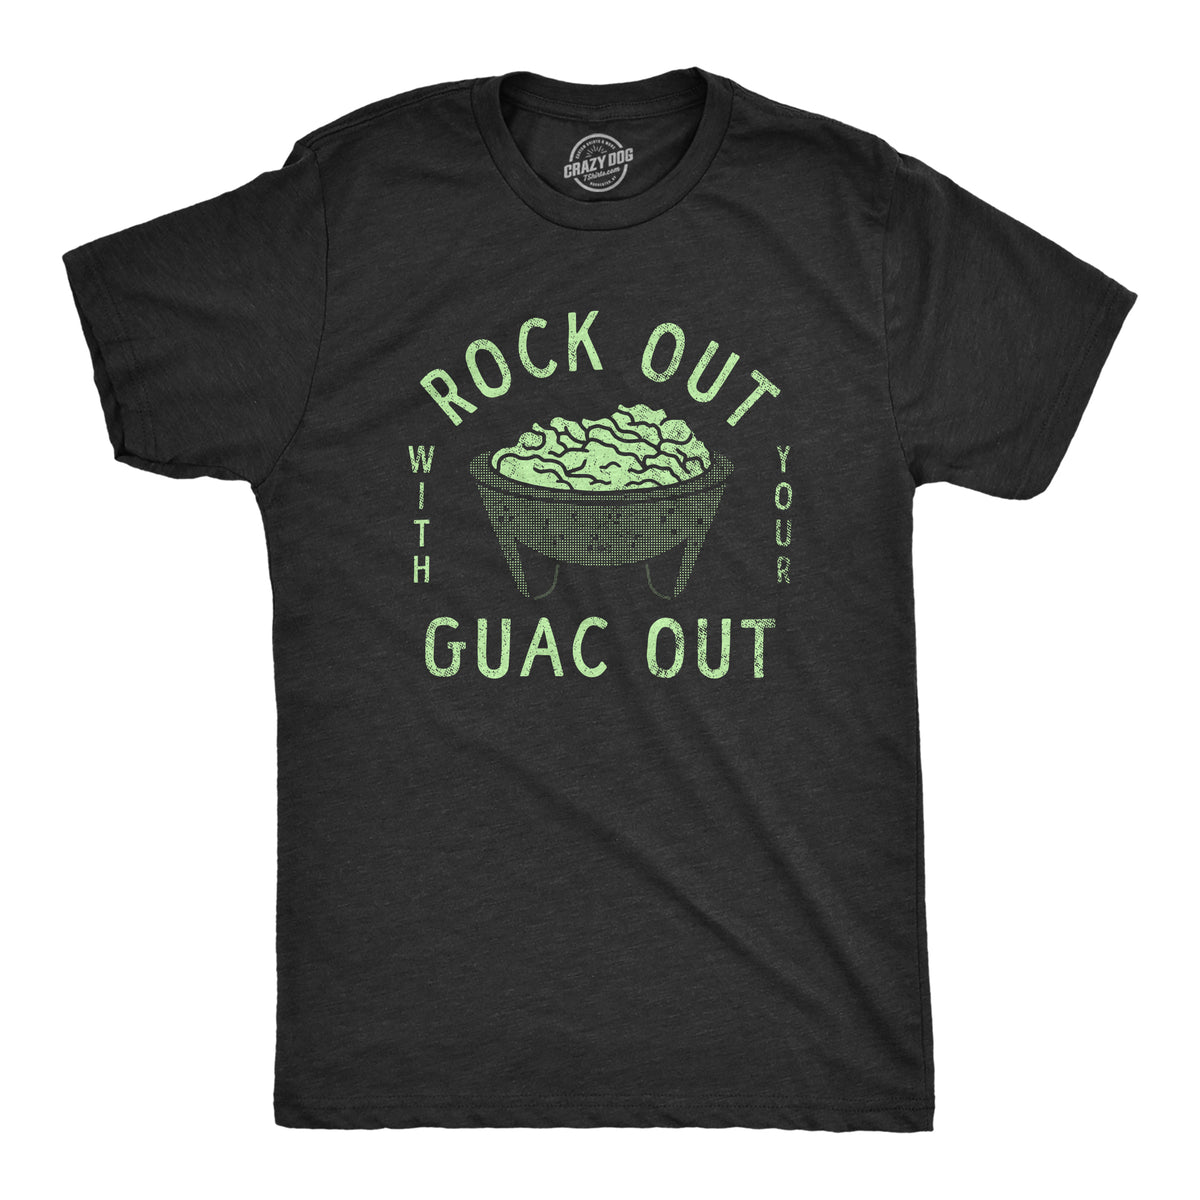 Funny Heather Black - GUAC Rock Out With Your Guac Out Mens T Shirt Nerdy Food Tee